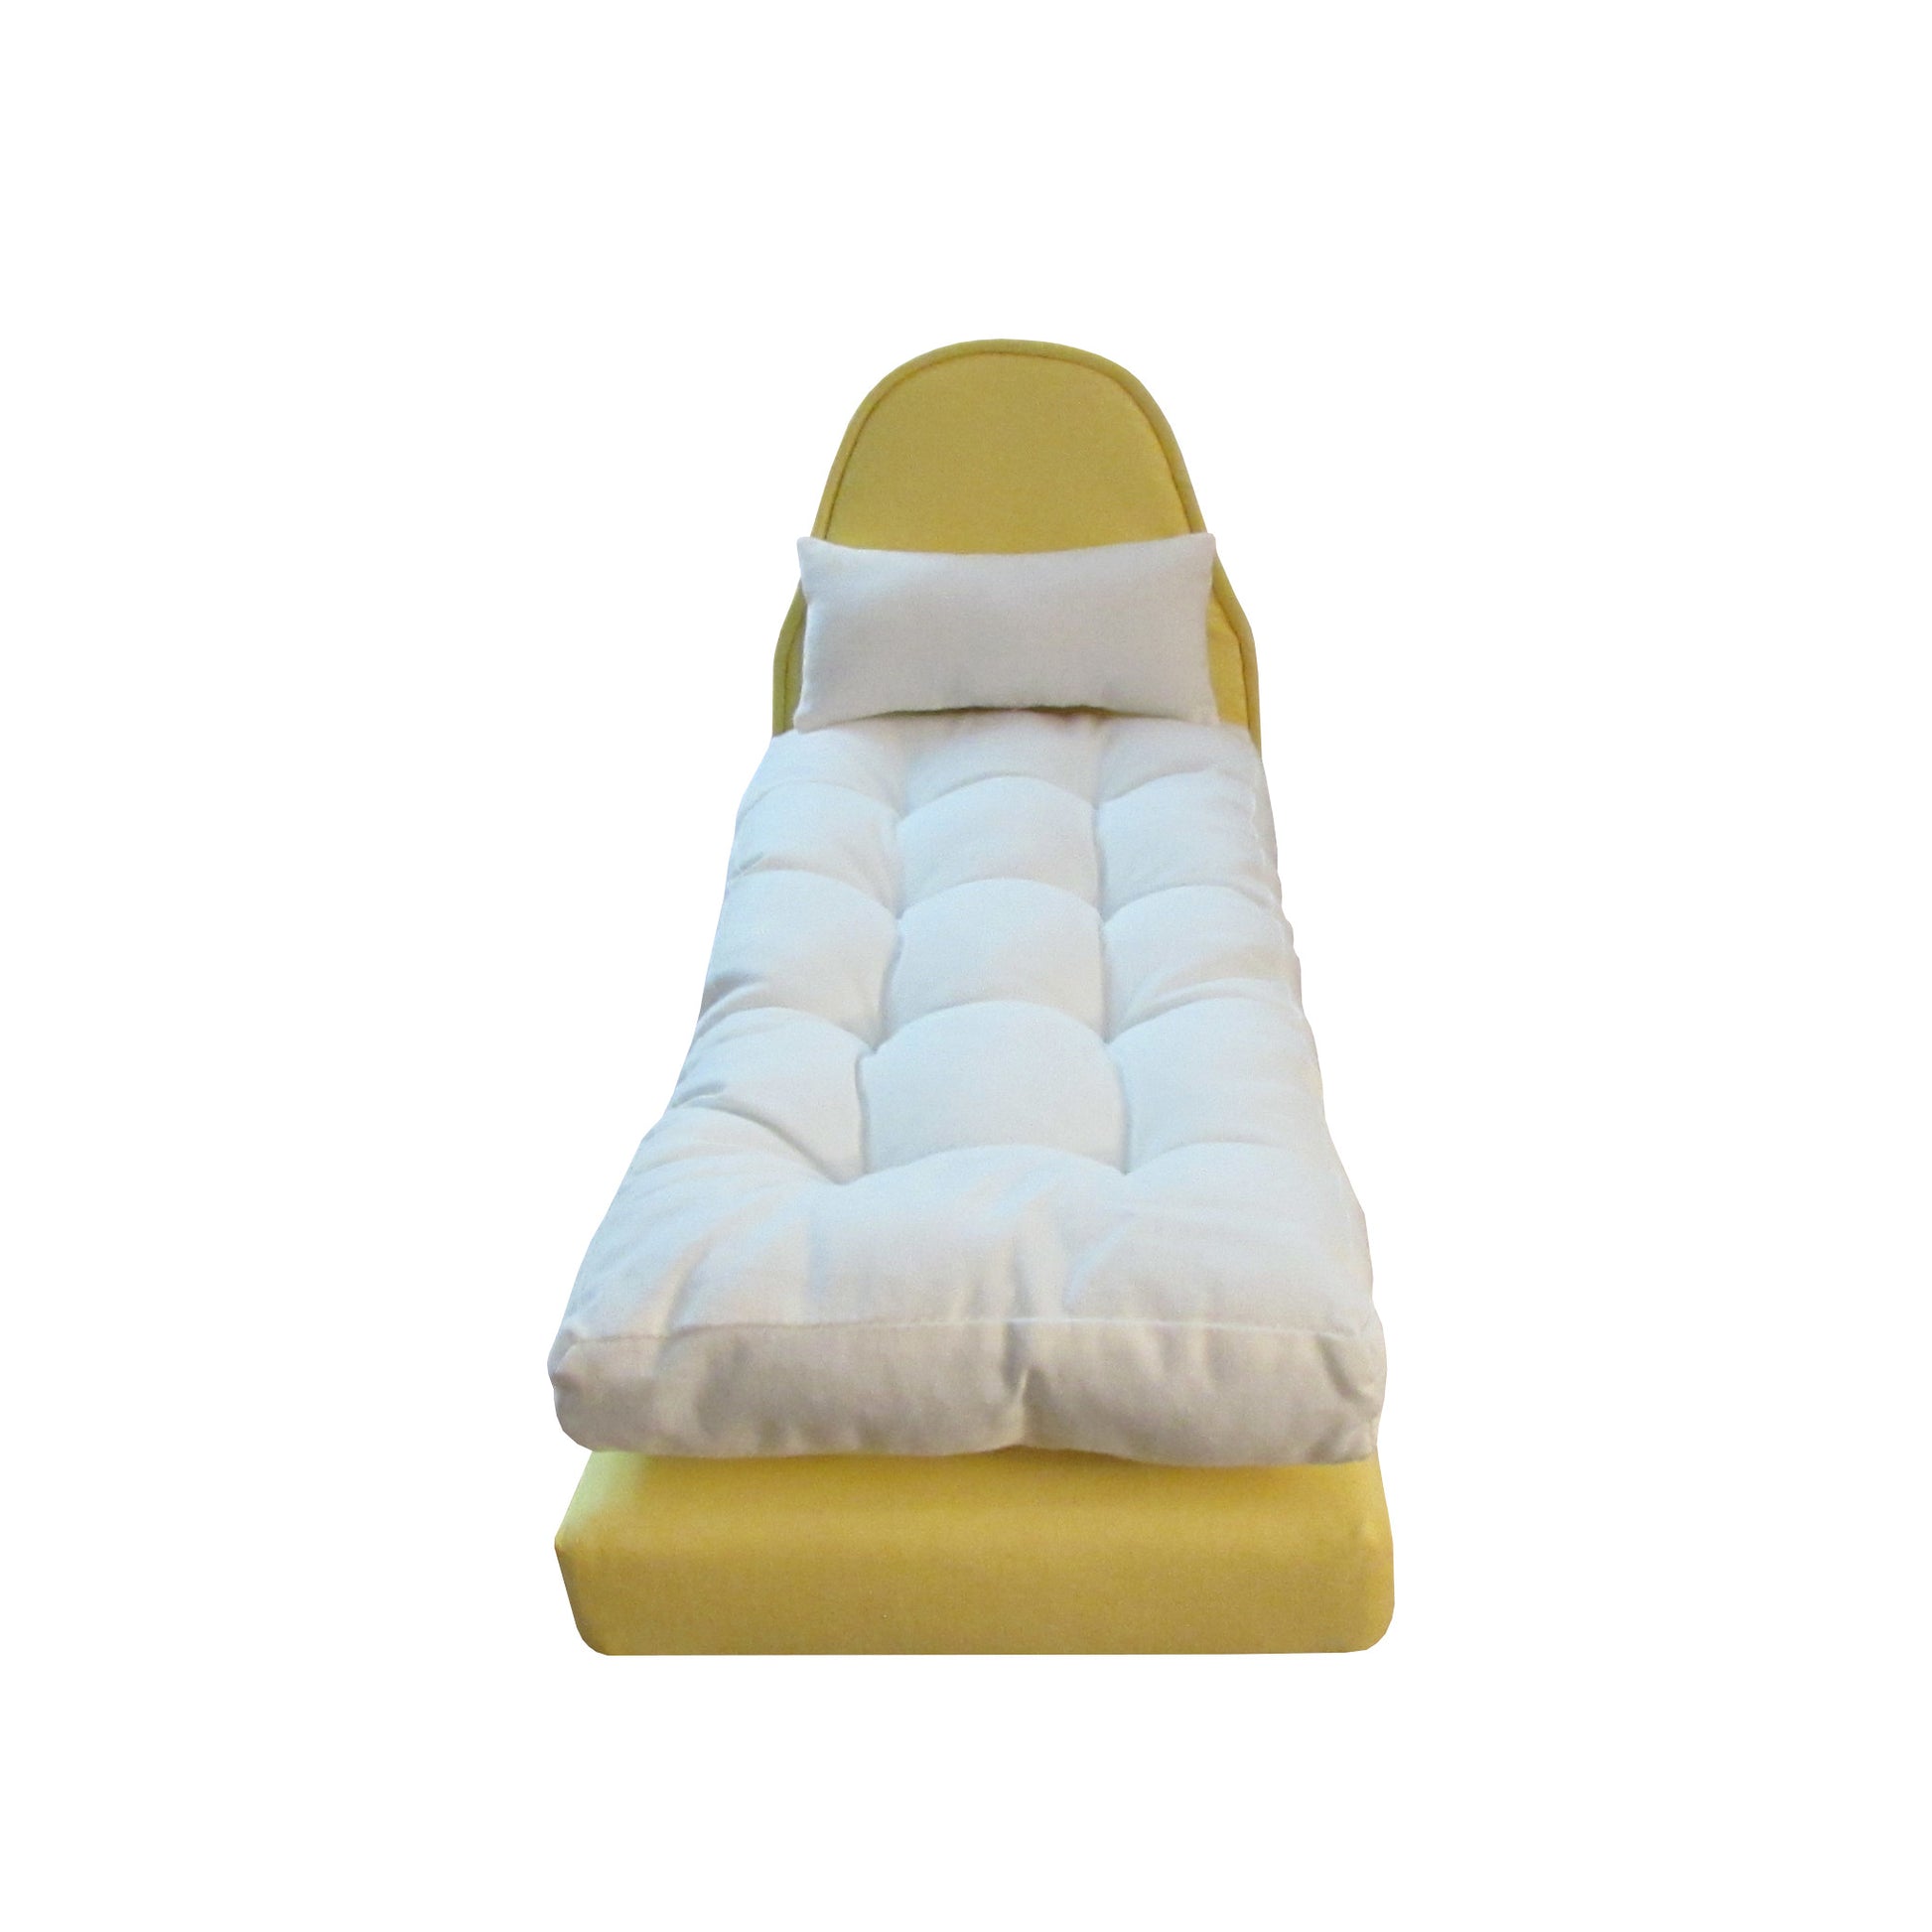 Upholstered Light Yellow Doll Bed and Mattress for 11.5-inch and 12-inch dolls